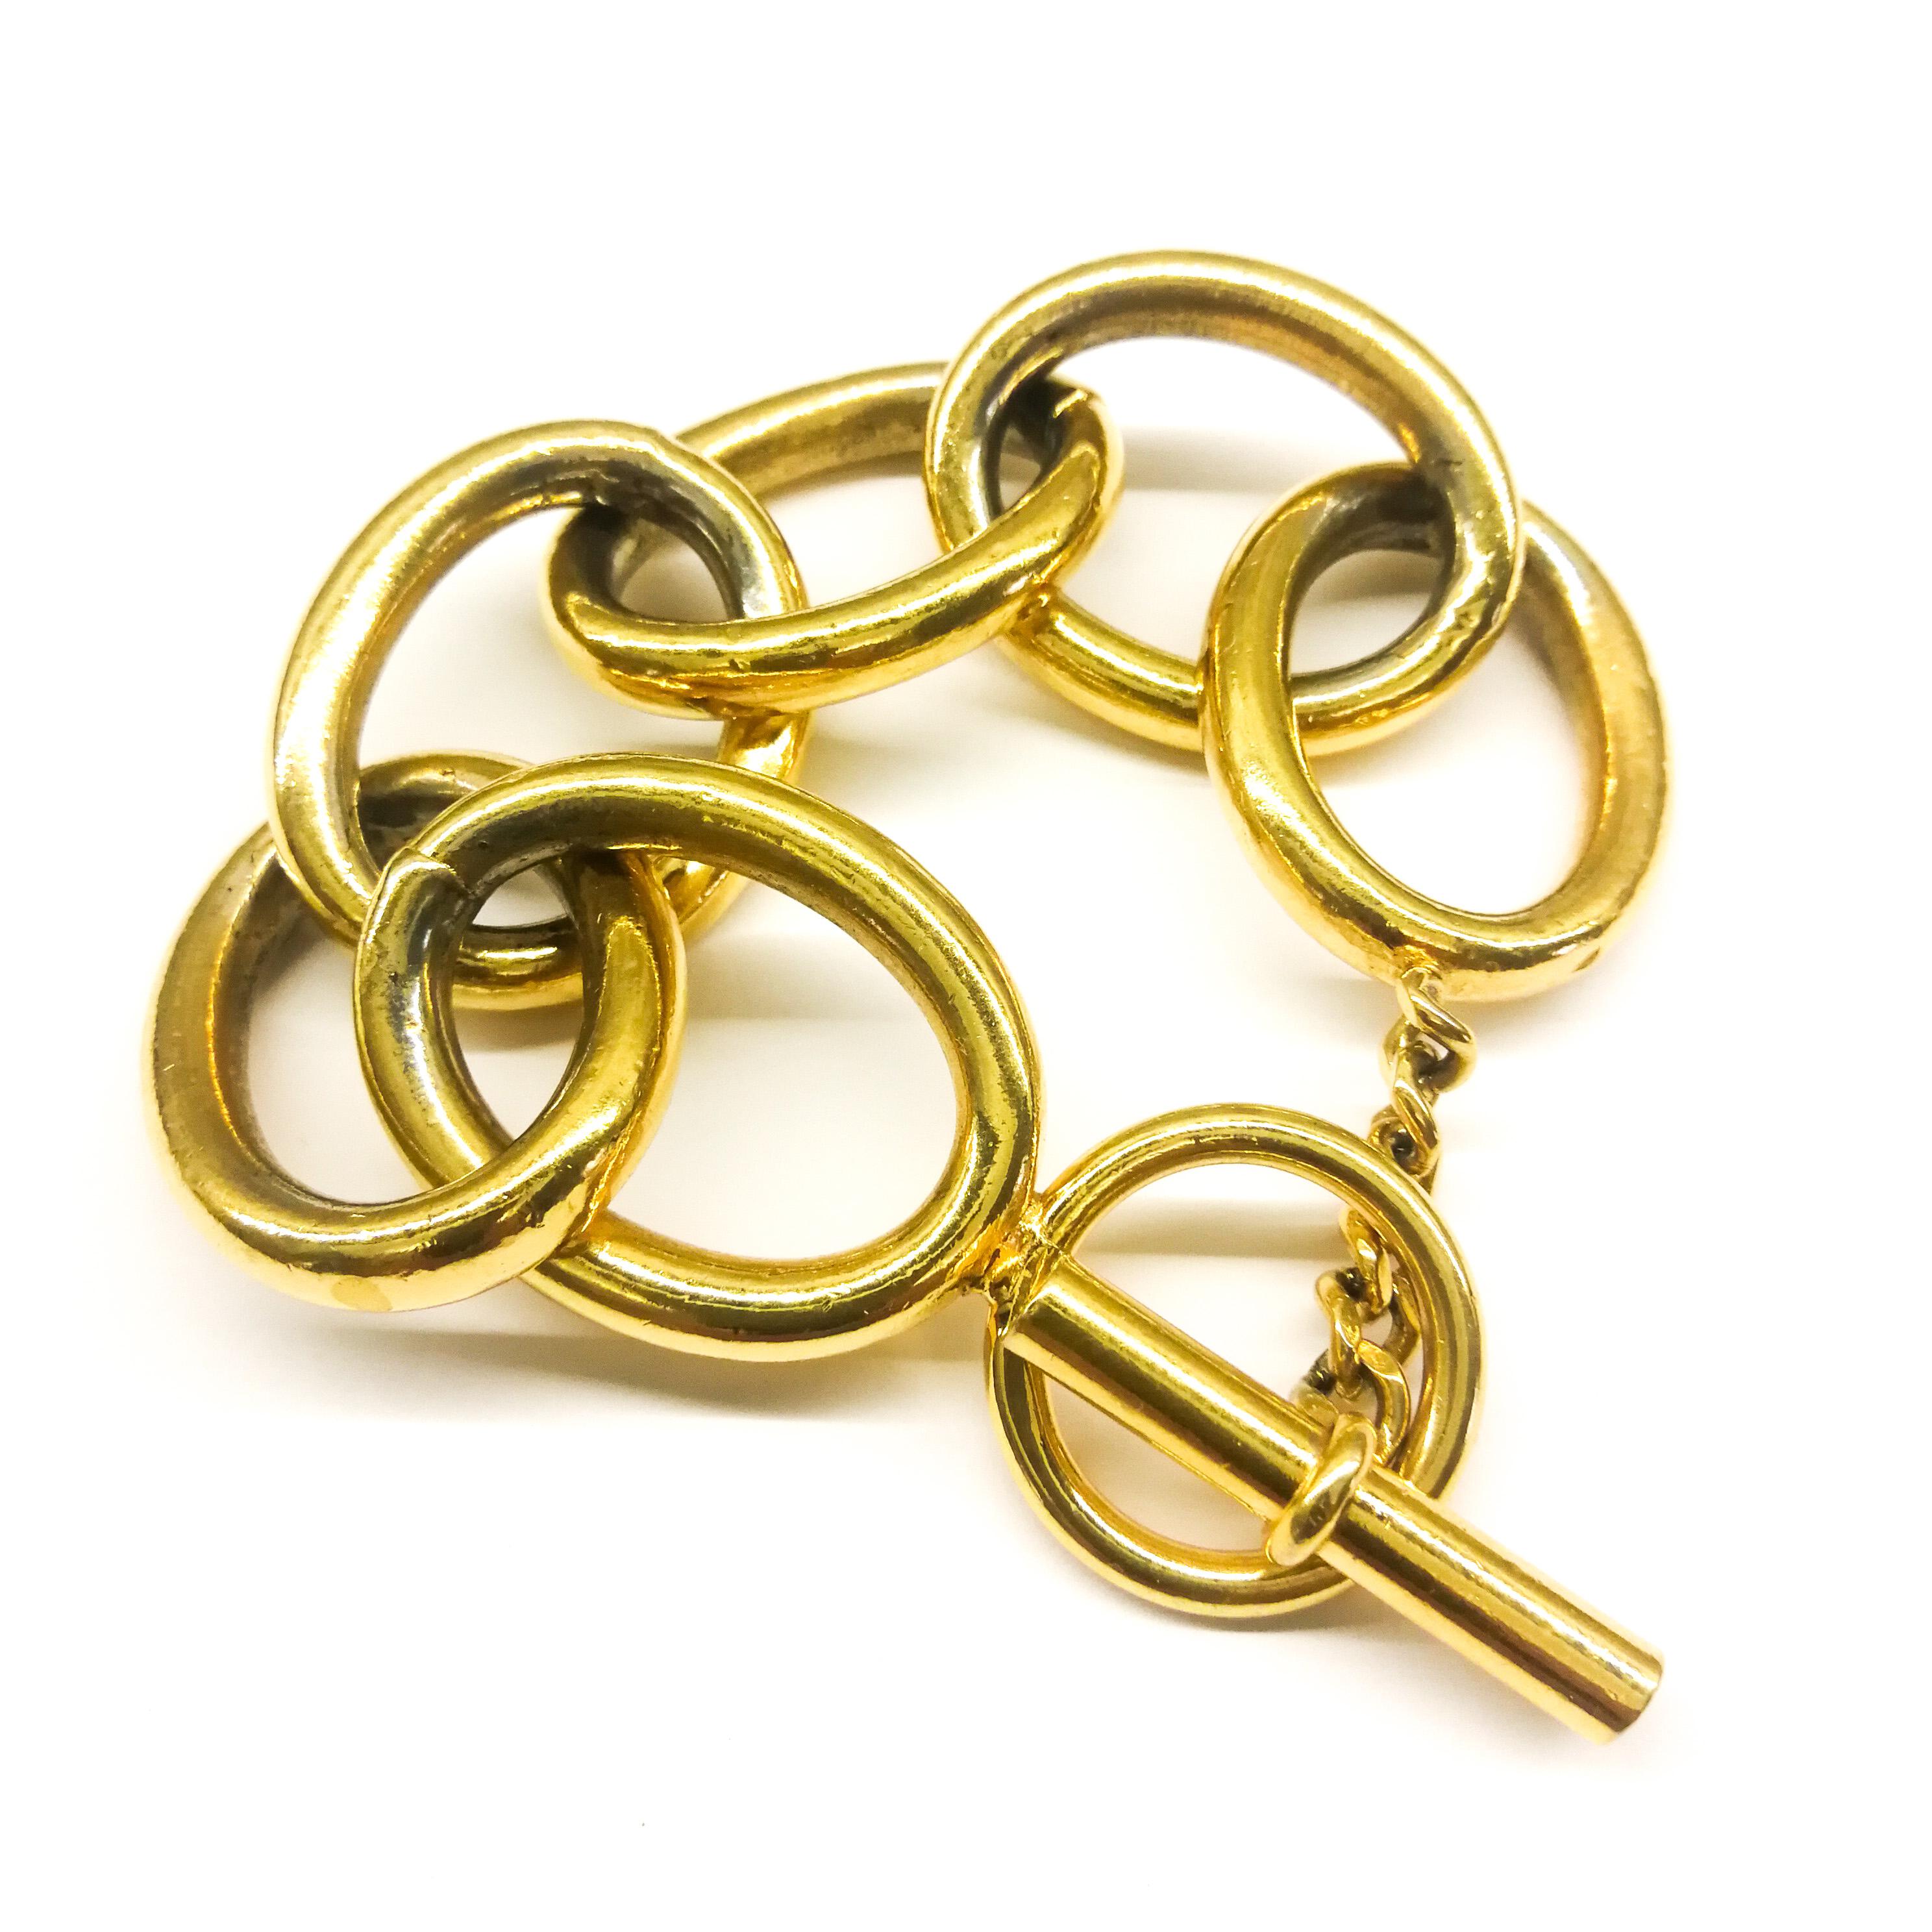 A highly stylish and classic oval link bracelet, in softly gilded metal, from the 1960s by Chanel. Simply marked 'CHANEL' , this bracelet was made by Maison Goossens for Chanel,  a classic signature piece, with a simple but secure bar and circle